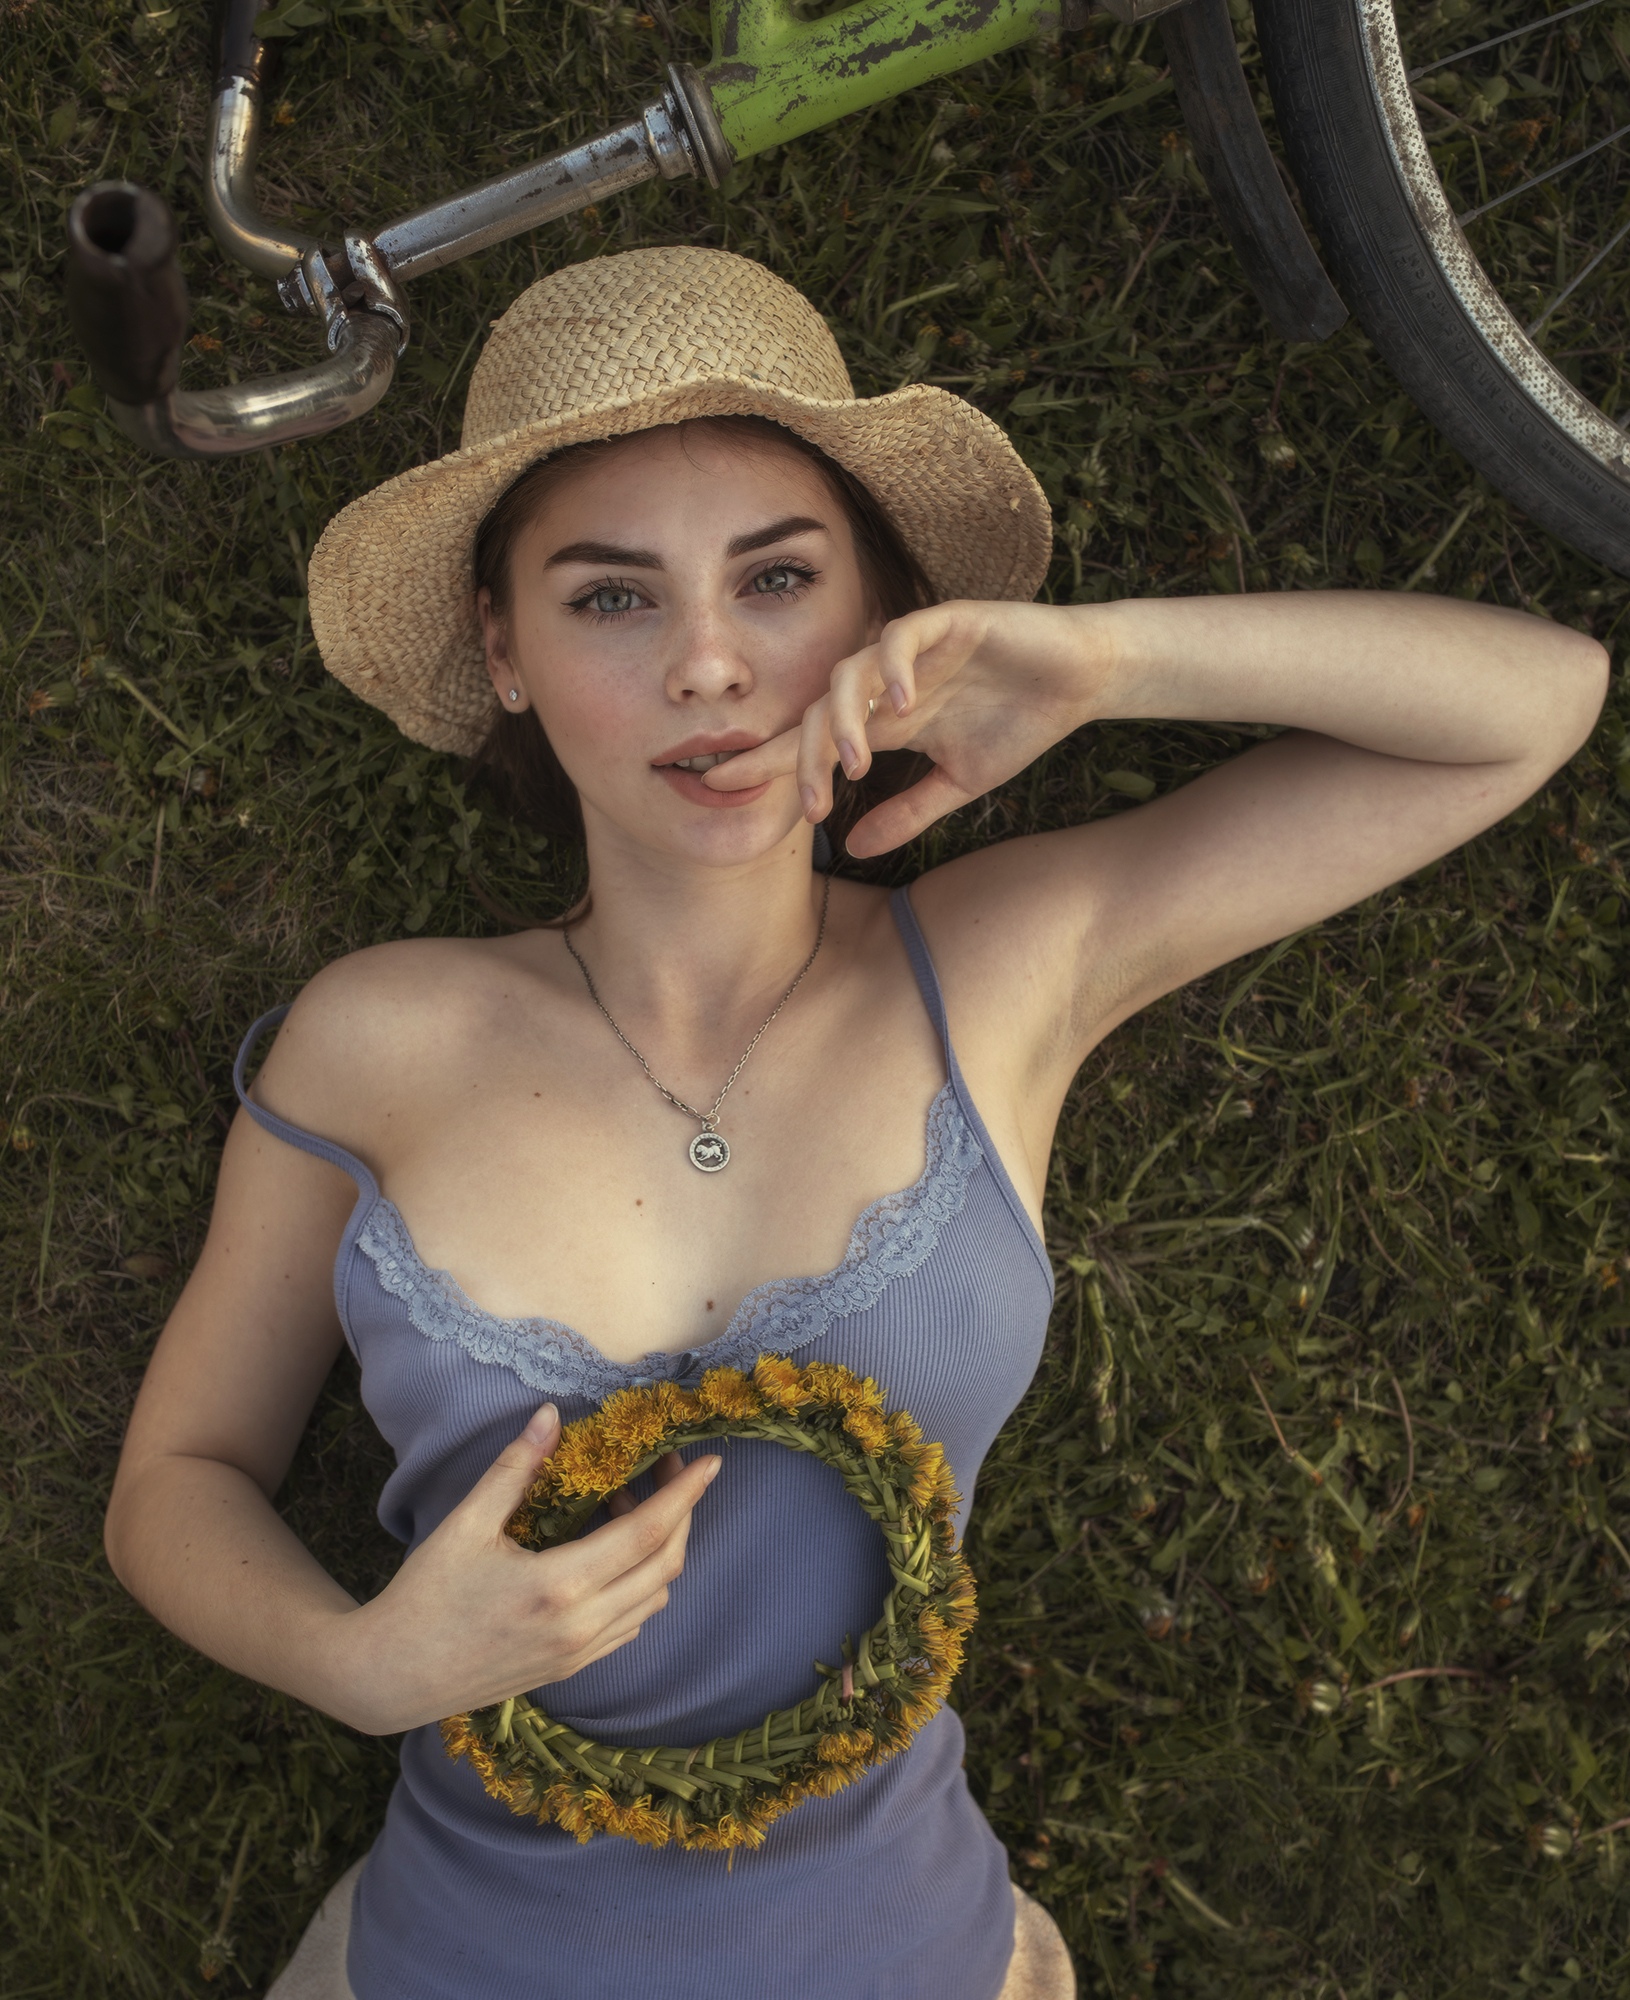 People 1630x2000 Irina Sivalnaya David Dubnitskiy necklace hat finger in mouth bare shoulders brunette lying on back on the floor looking at viewer women outdoors flowers women portrait display no bra nipples through clothing nipple bulge finger on lips woman with hat